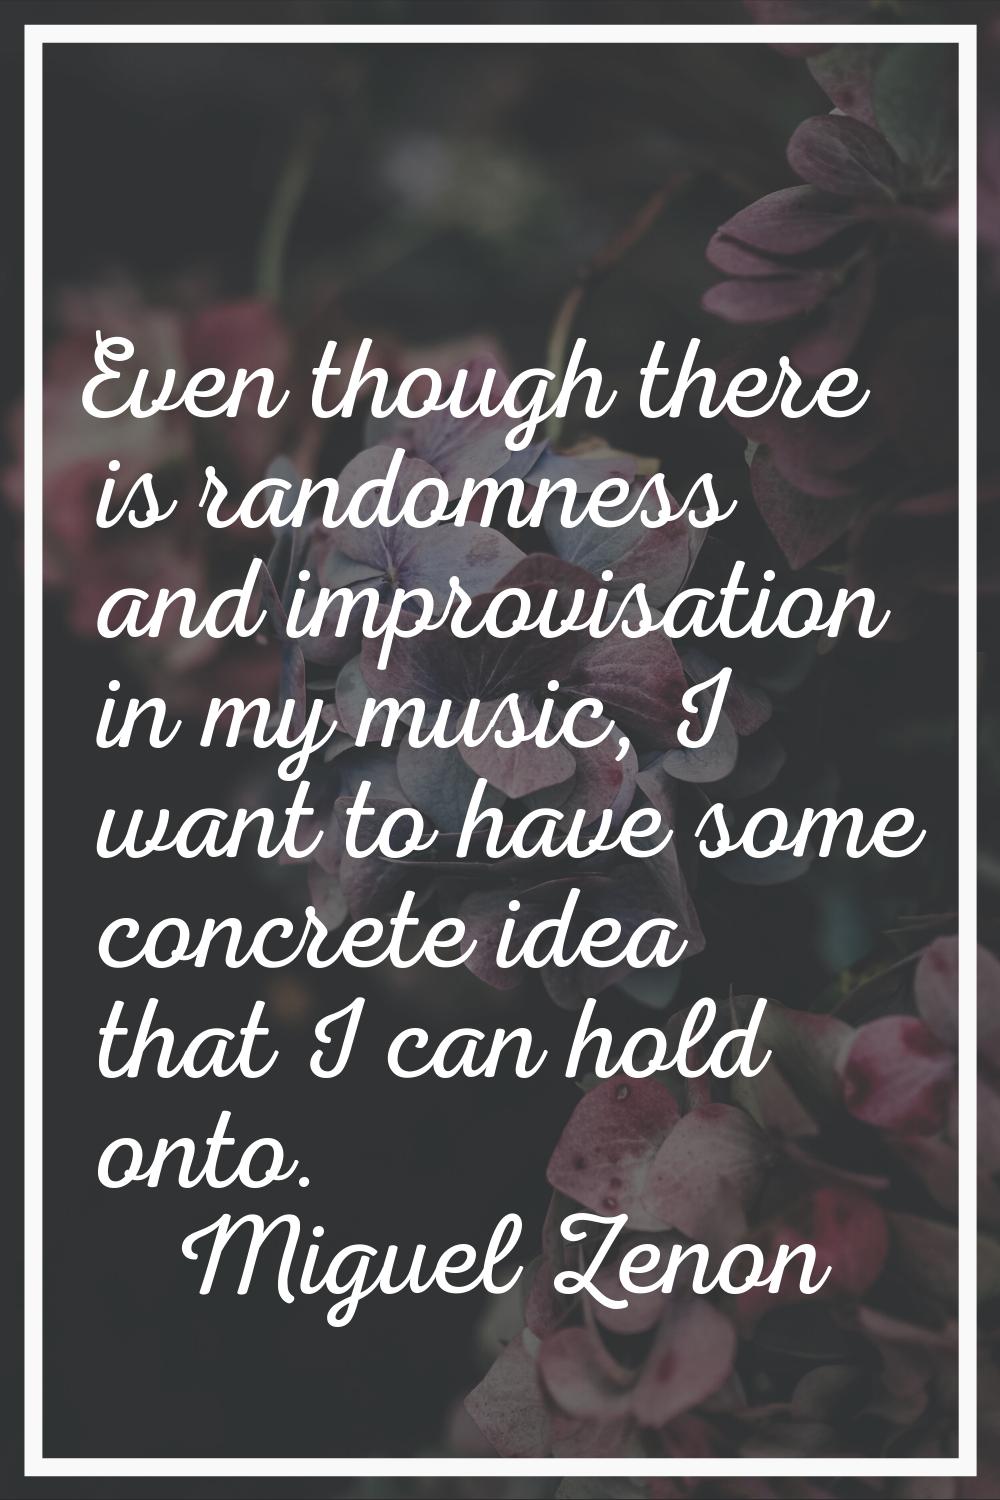 Even though there is randomness and improvisation in my music, I want to have some concrete idea th